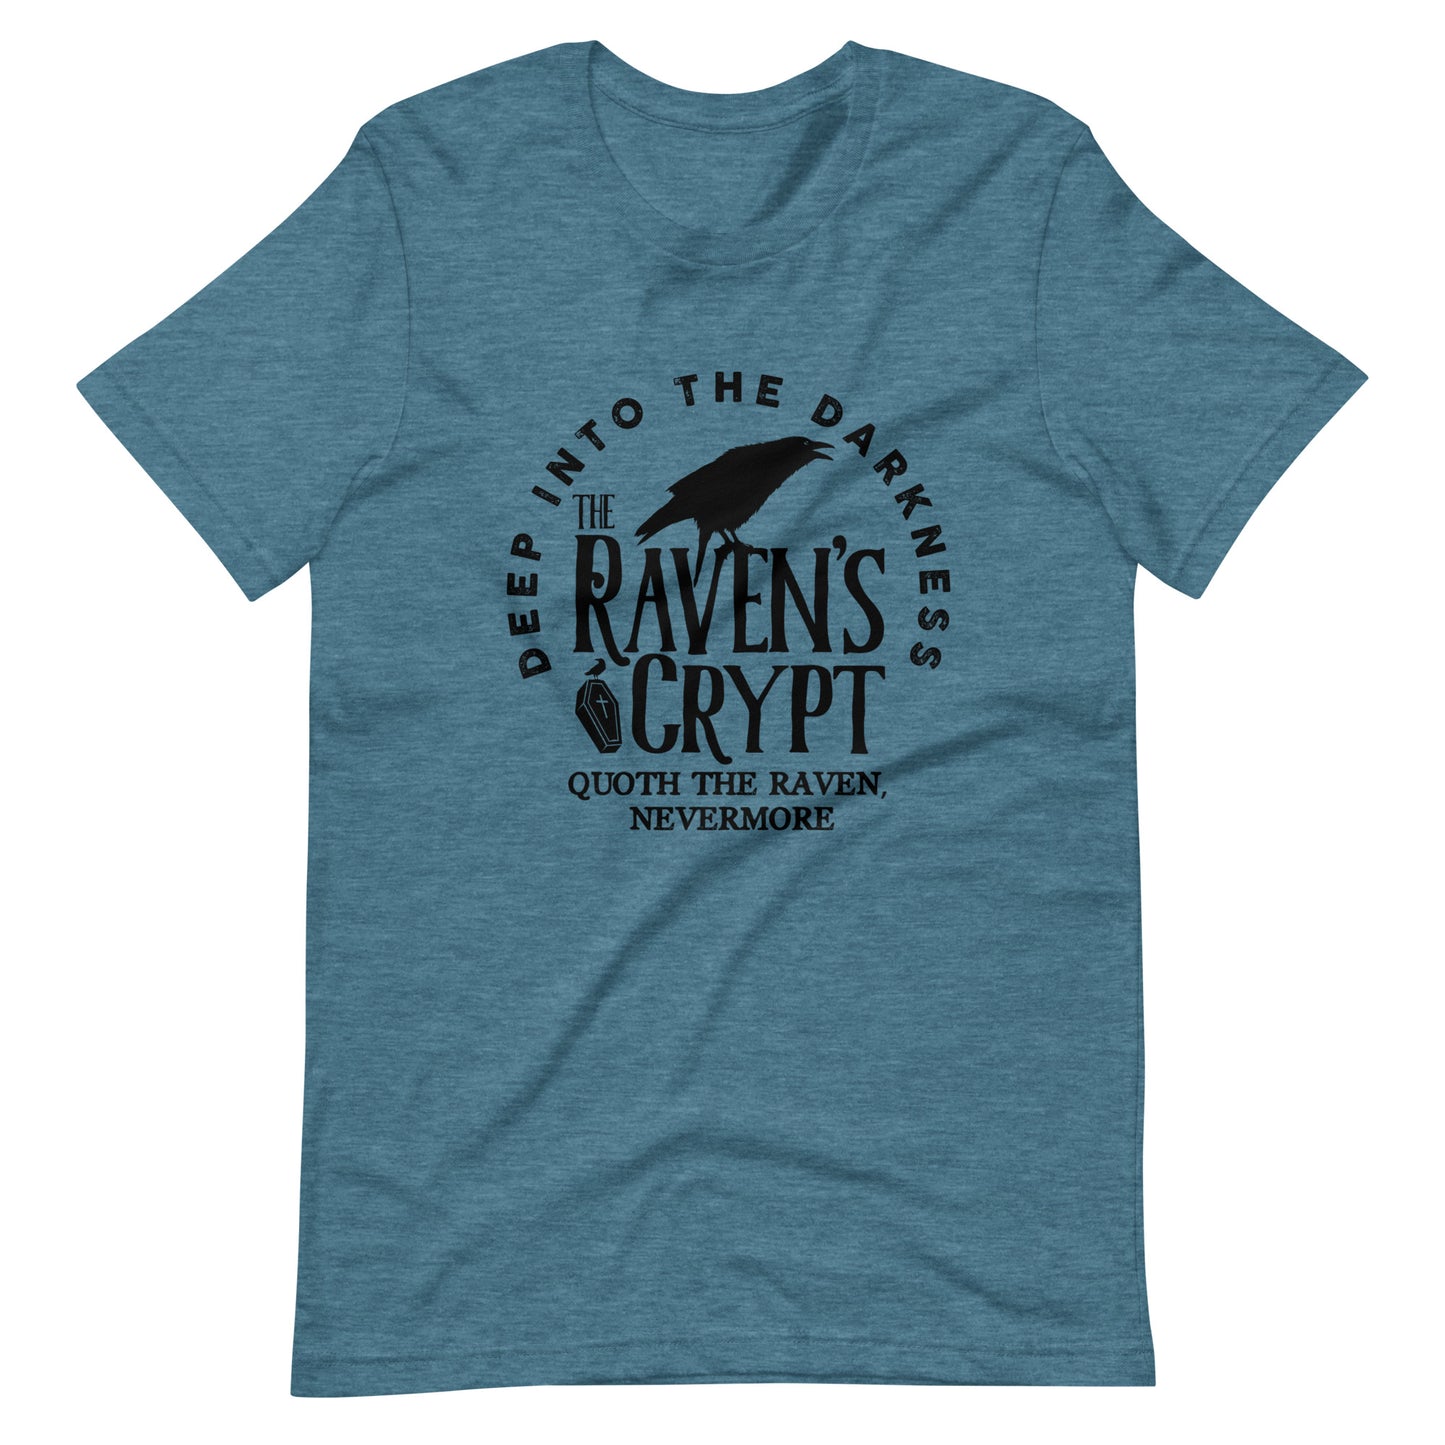 Deep Into the Darkness The Raven's Crypt - Men's t-shirt- Heather Deep Teal Front